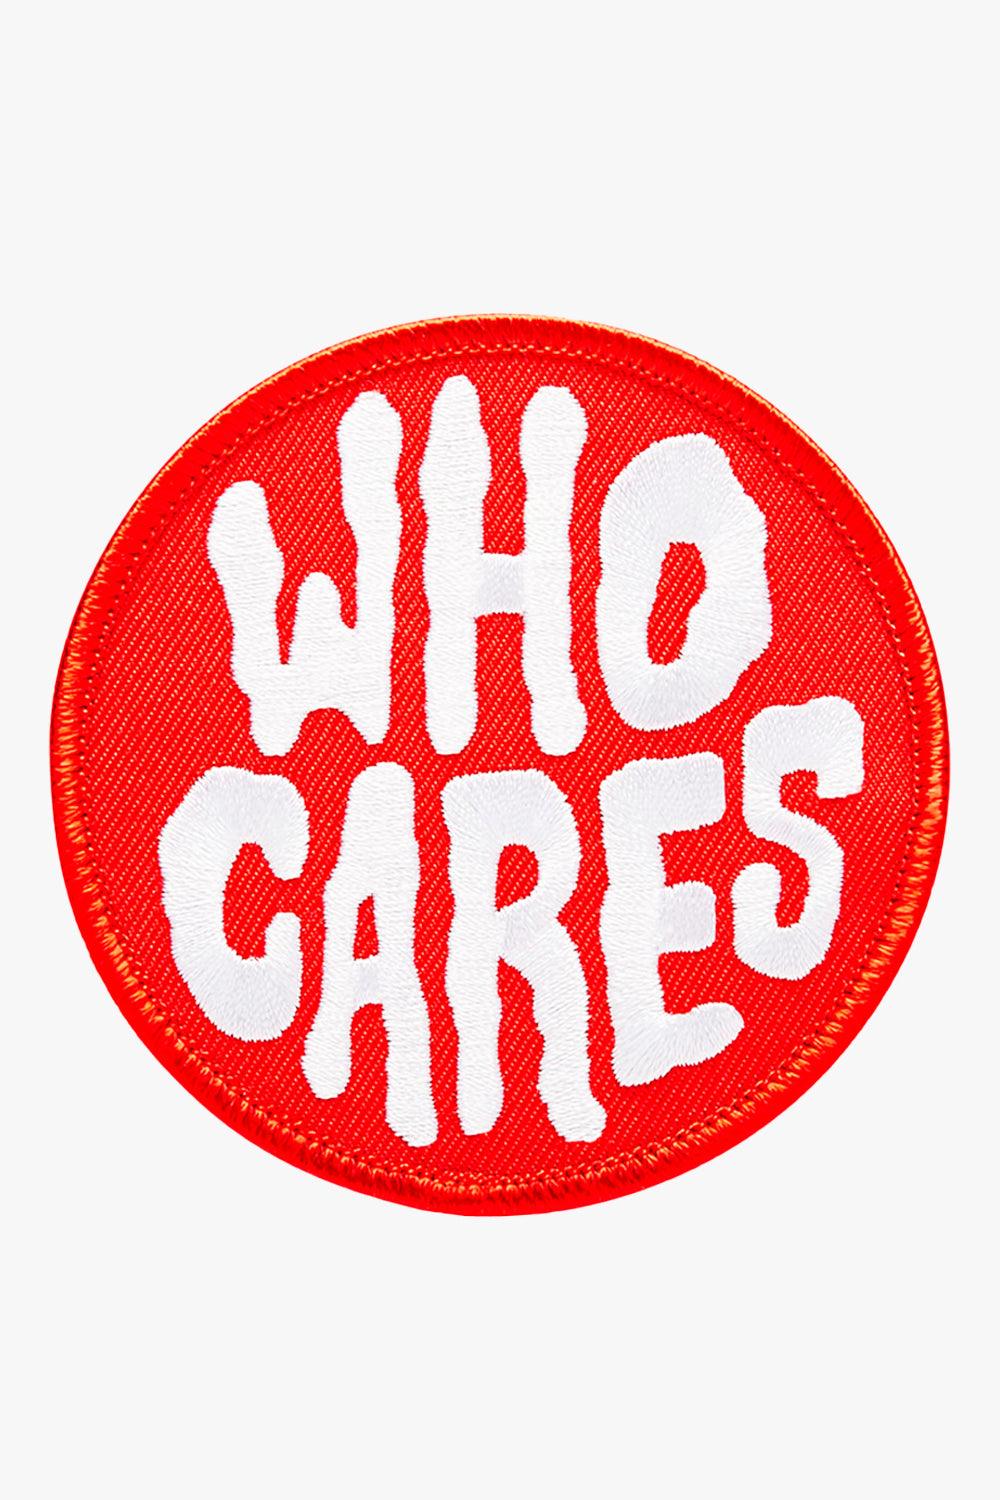 Who Cares Red Embroidery Patch - Aesthetic Clothes Shop